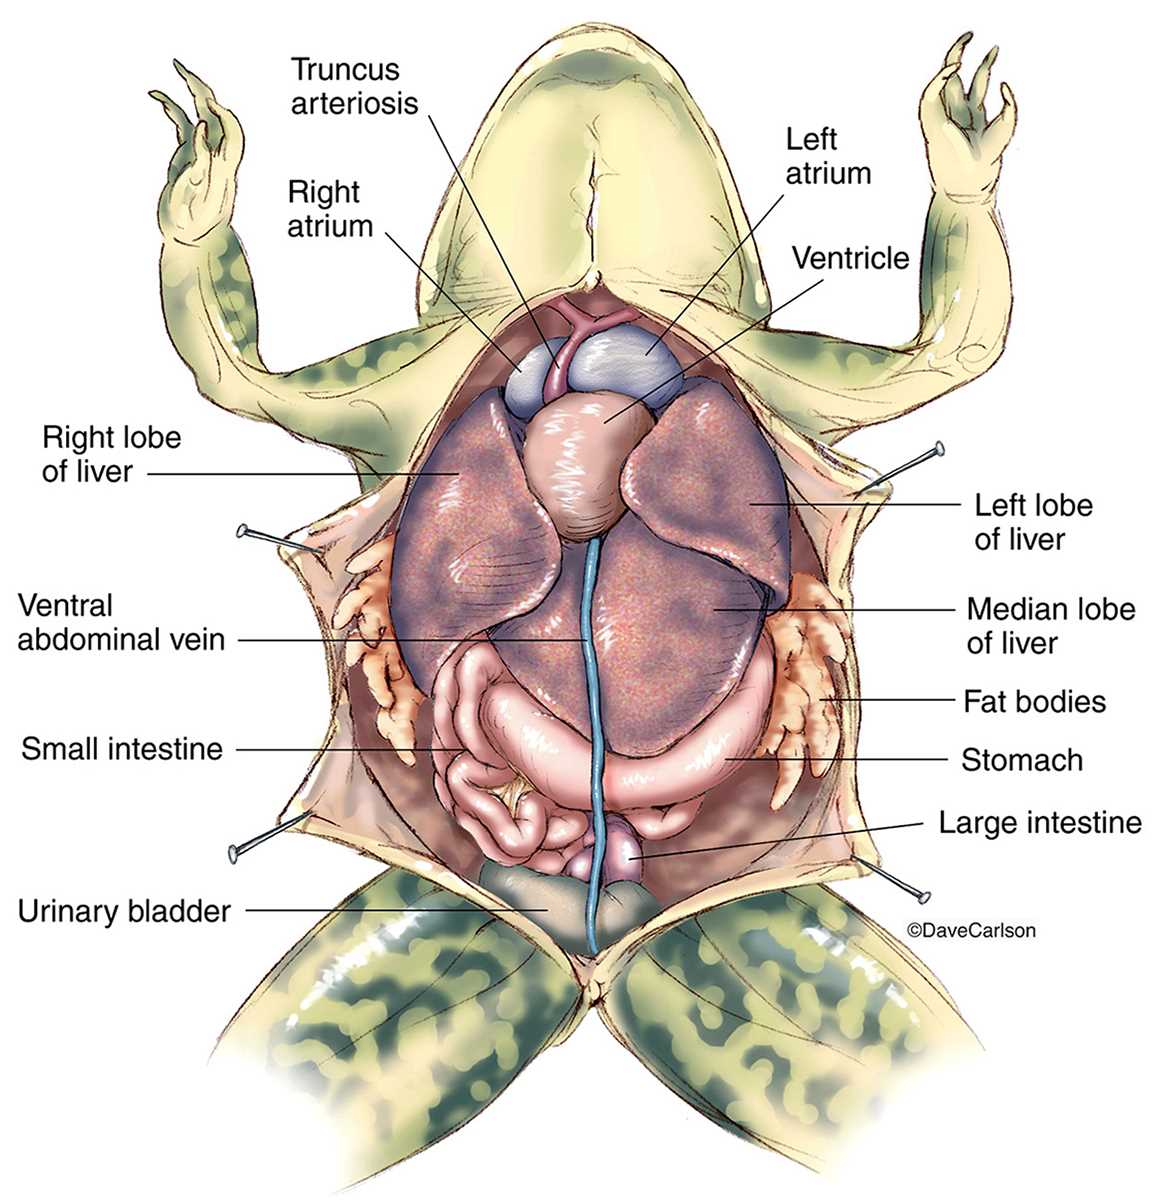 How many lobes does a frog's liver have?